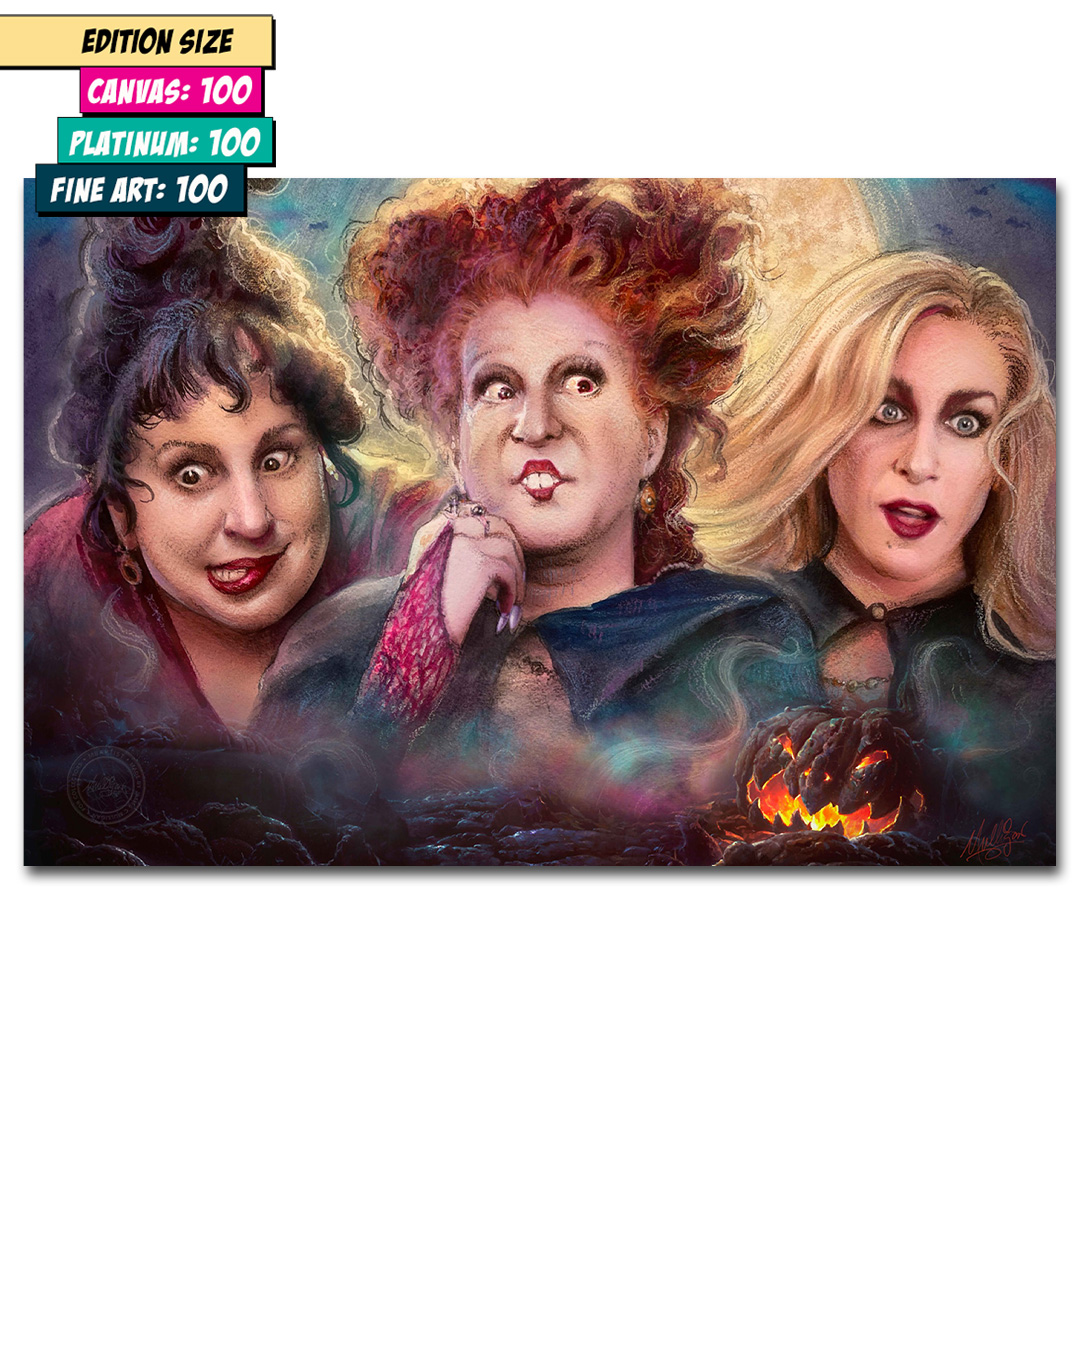 HOCUS POCUS: WITCH AND FAMOUS